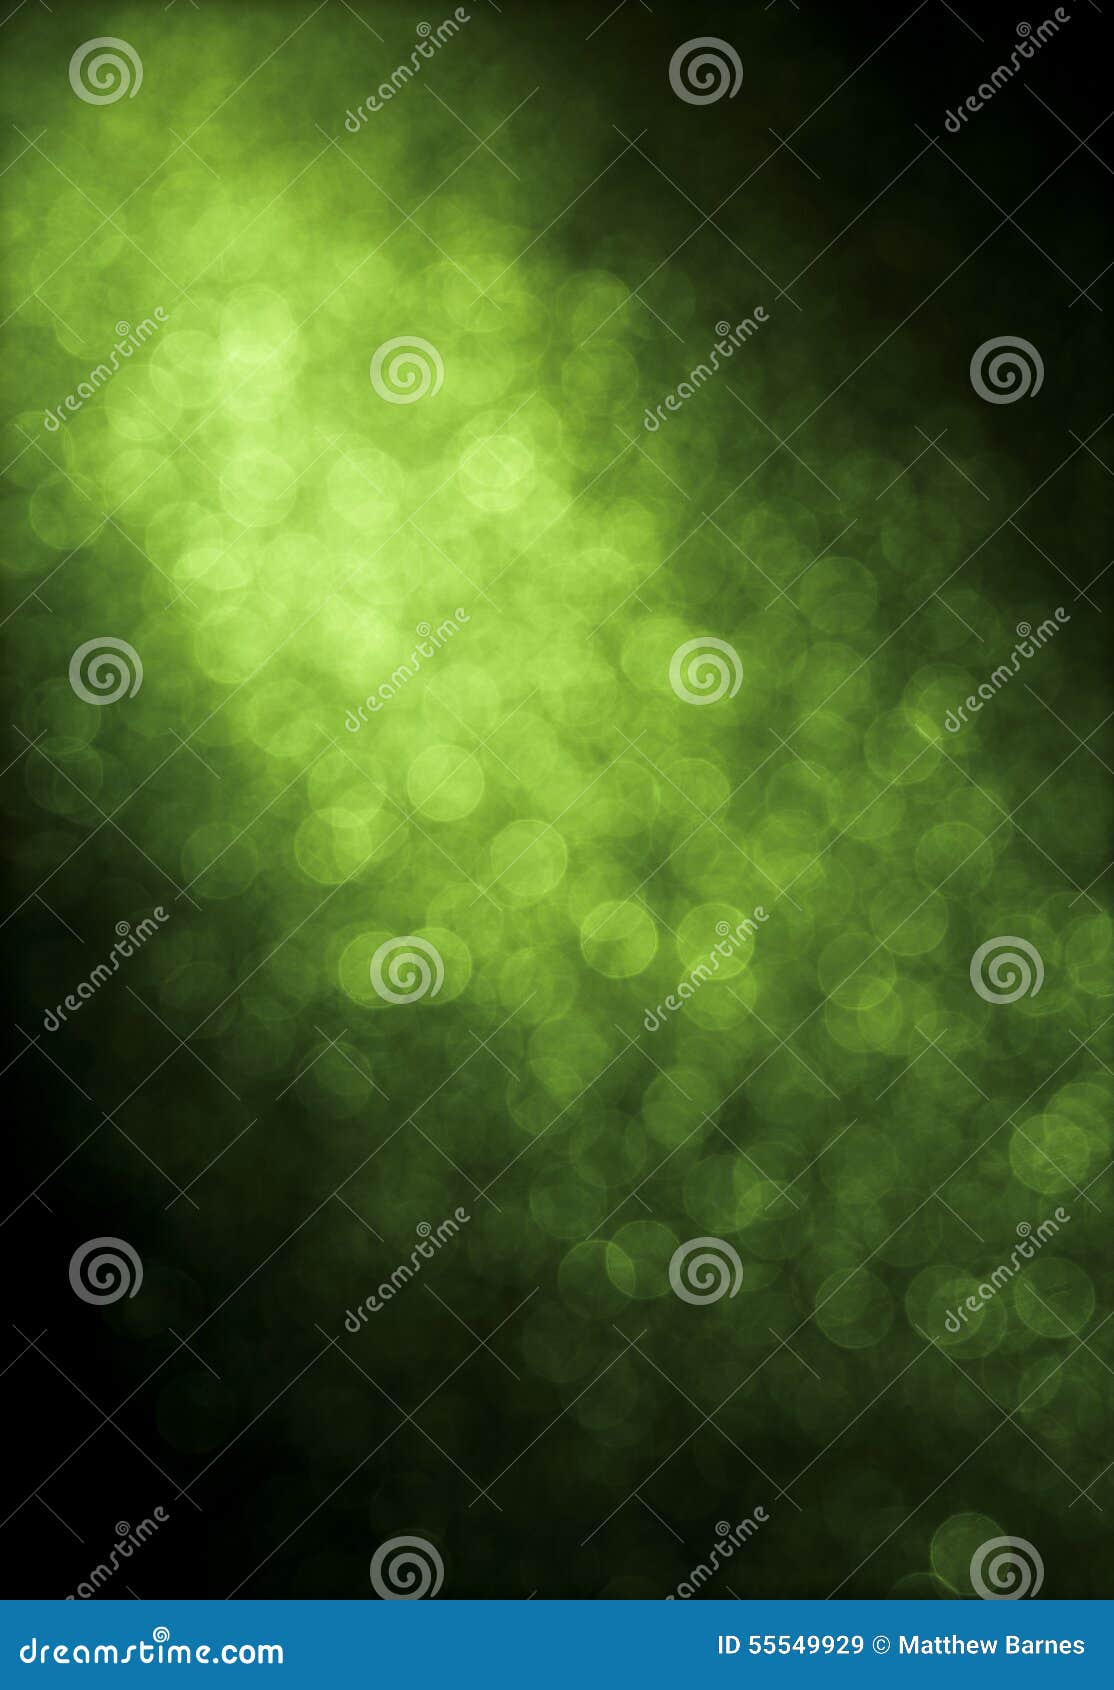 bright unfocused green abstract bokeh background